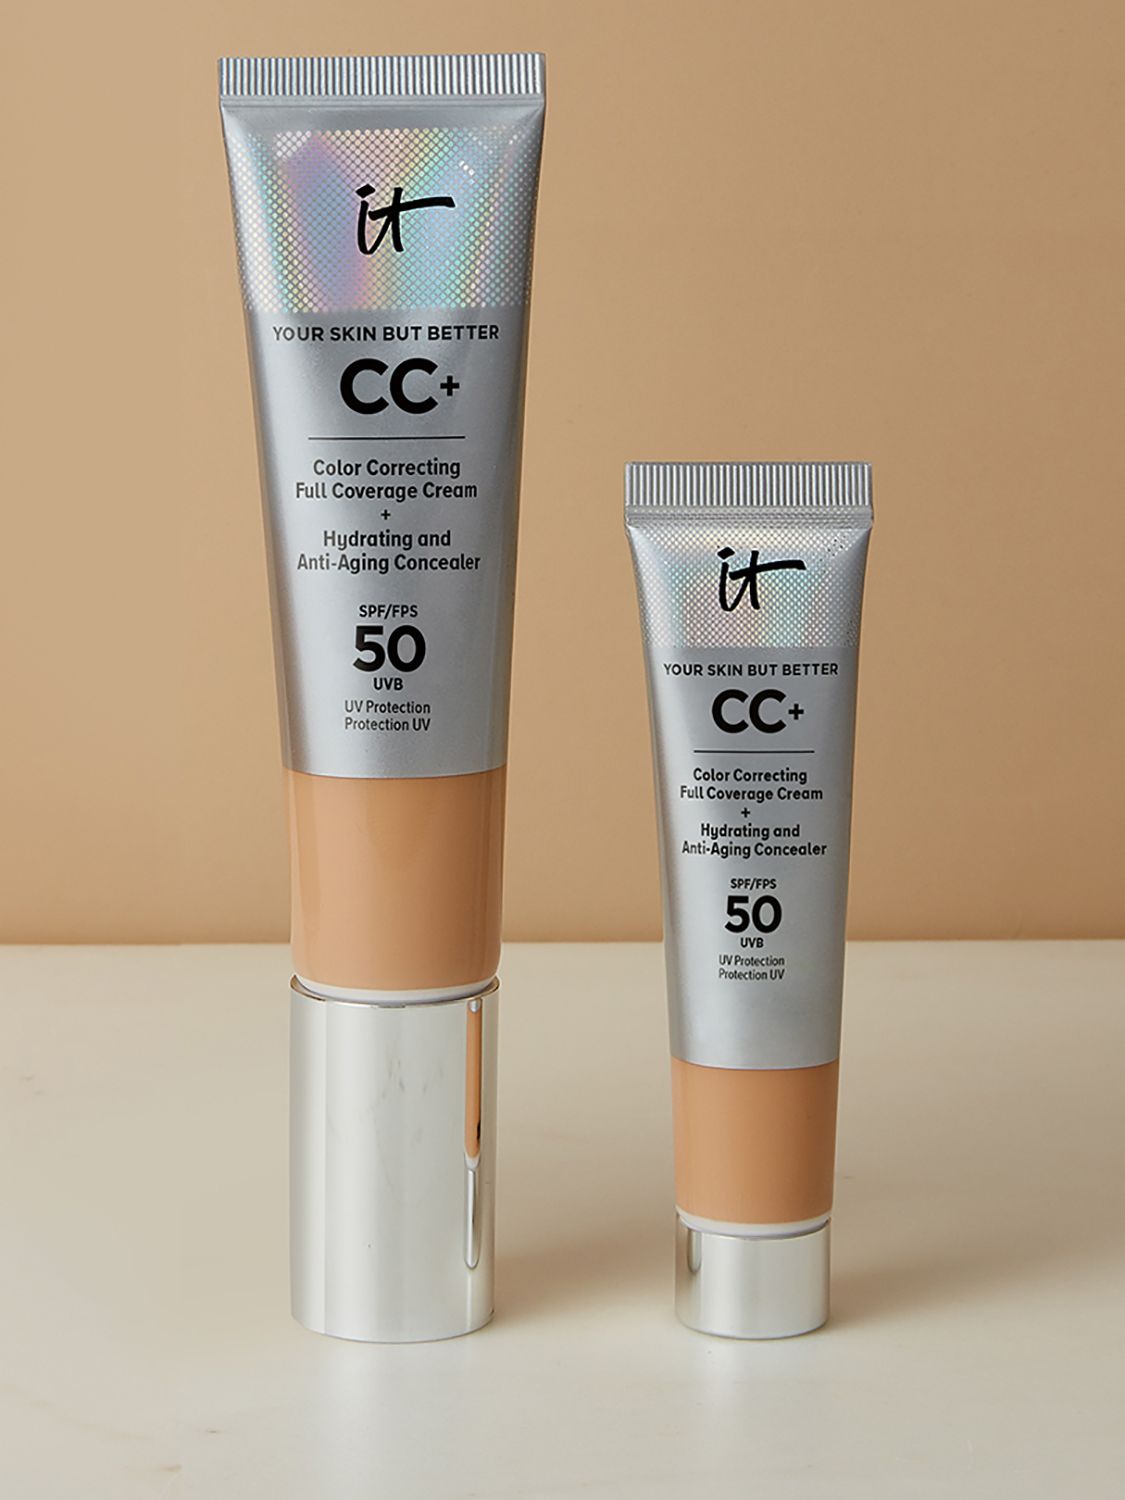 IT Cosmetics Your Skin But Better CC+ Cream with SPF 50 Travel Size, Light